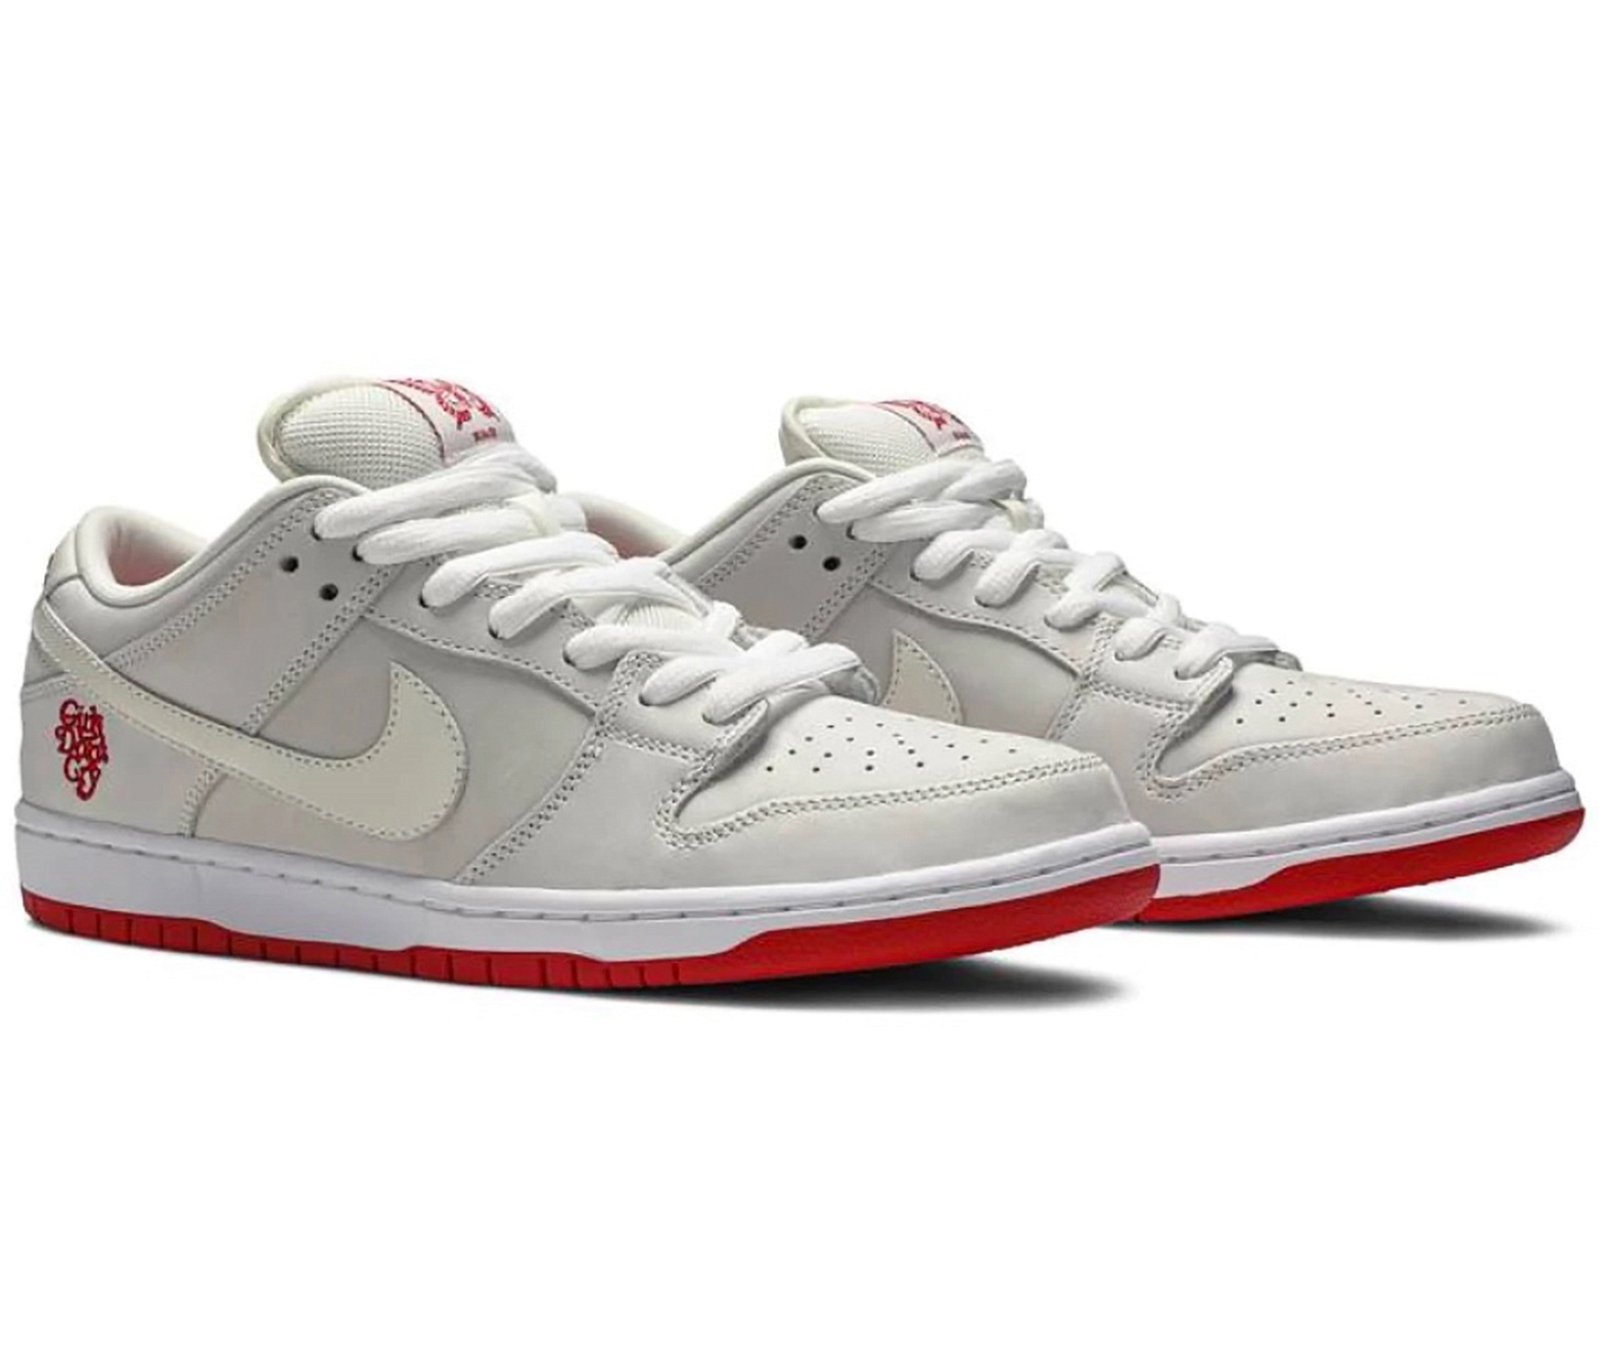 Nike SB Dunk Low Girls Don't Cry (F&F) sneakers